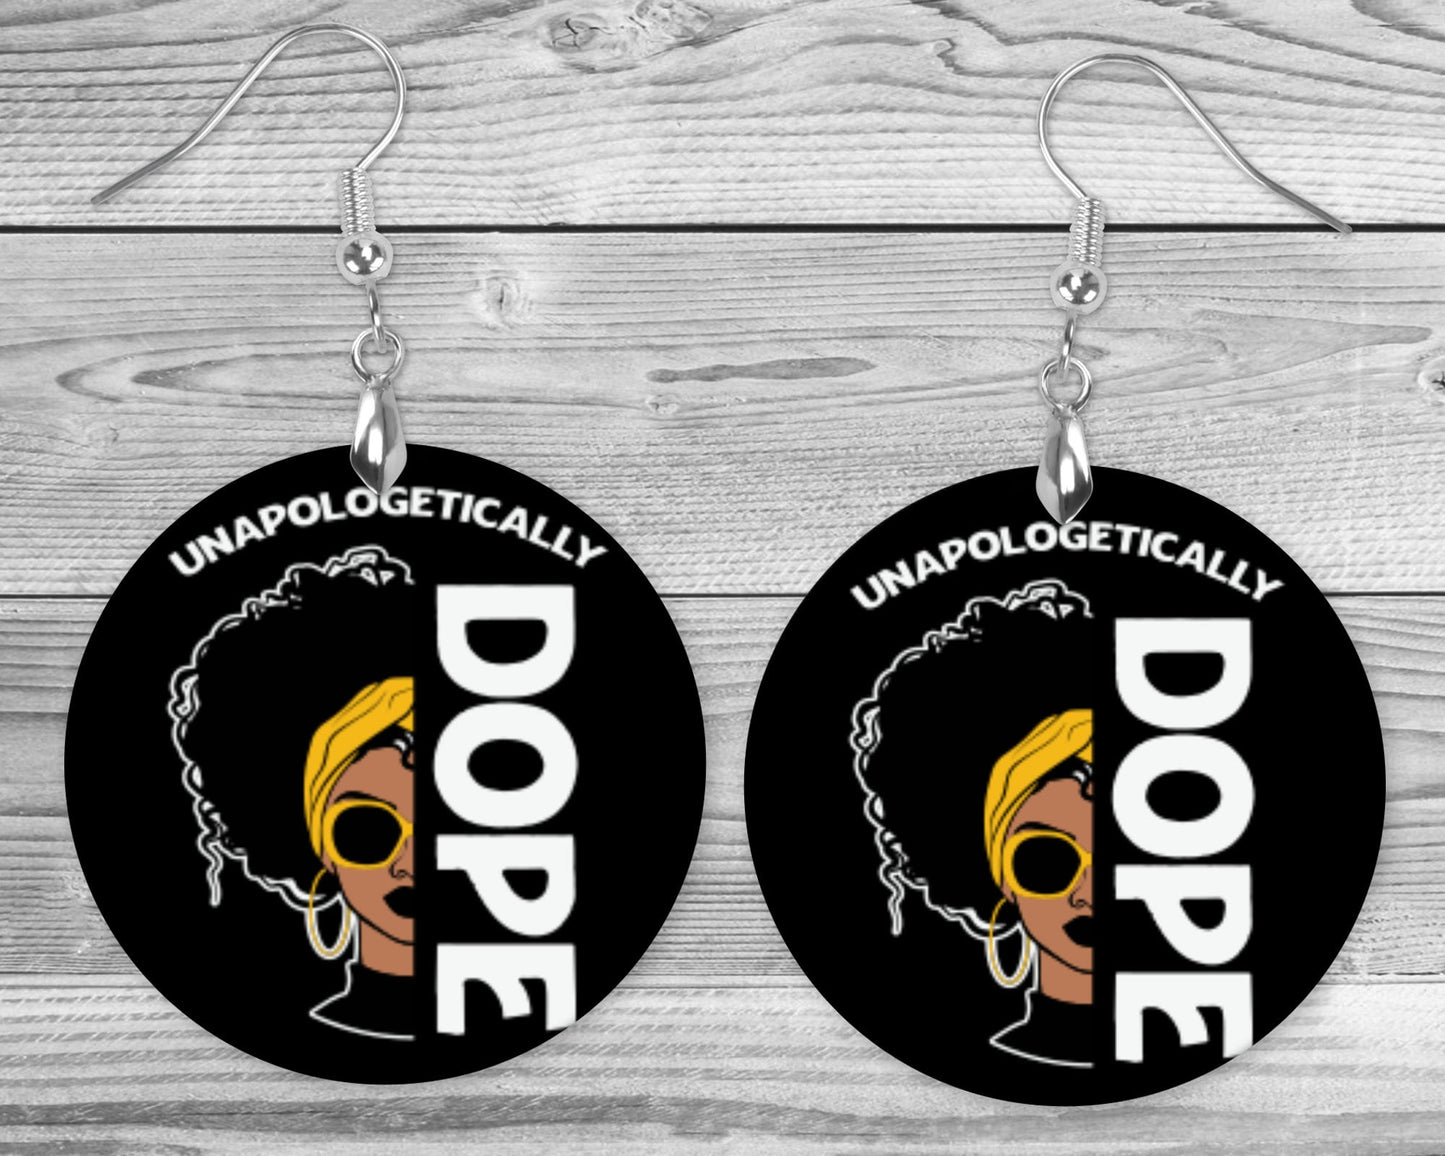 Unapologetically Dope Earrings | Afro | Dangle | Colorful